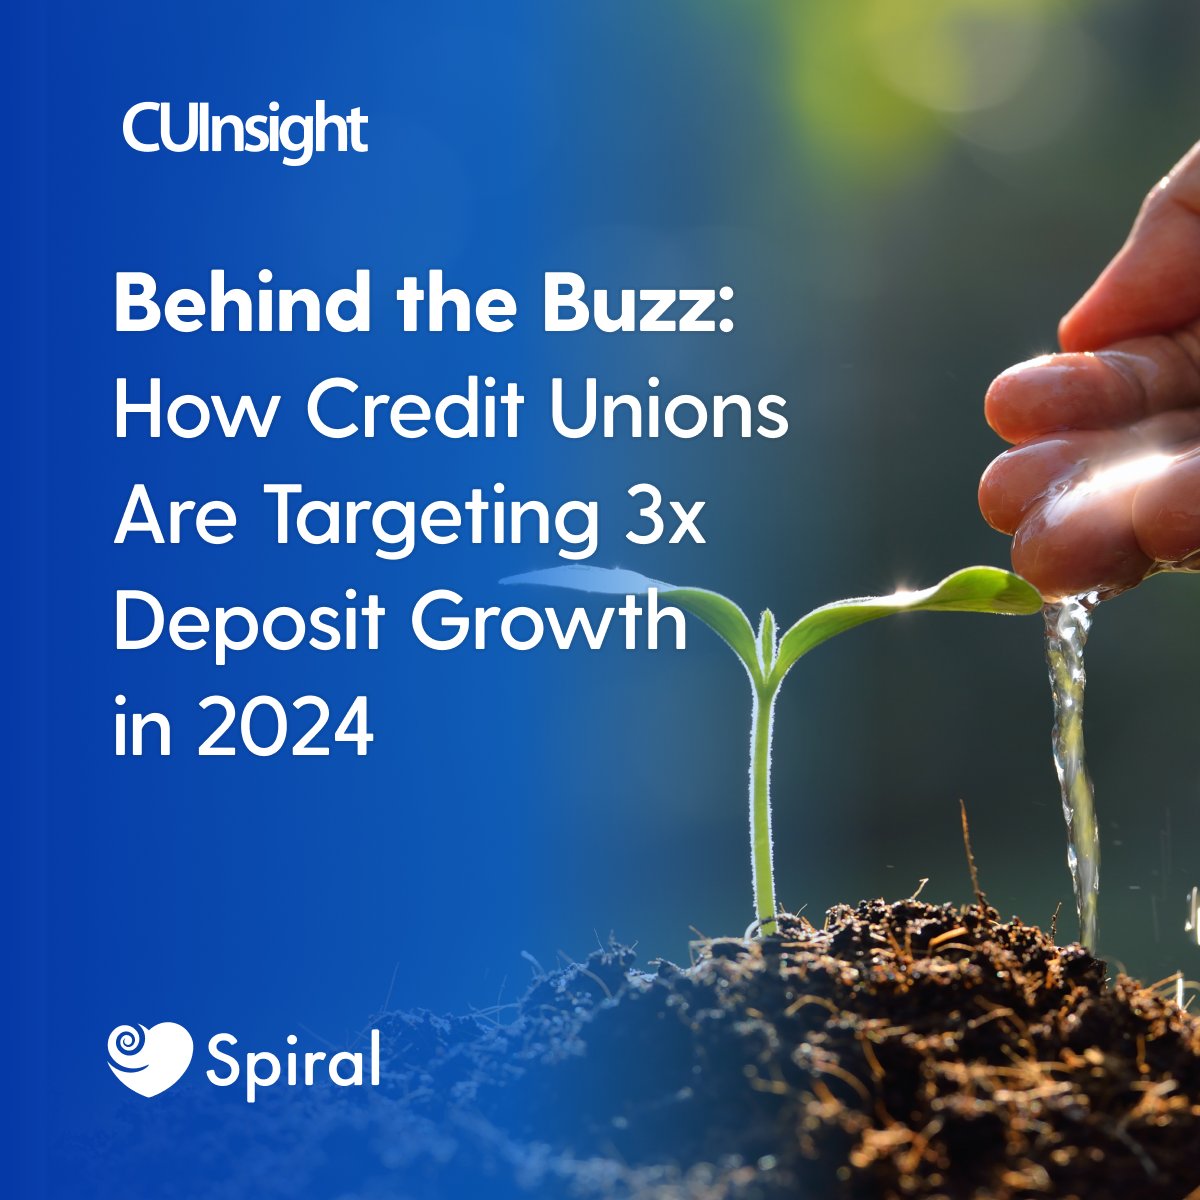 'The future of #CreditUnions lies in their ability to adapt and innovate in response to evolving consumer demands. That is why so many are prioritizing platforms like Spiral to increase deposit growth...' Read more at bit.ly/CU-Buzz @CUInsight